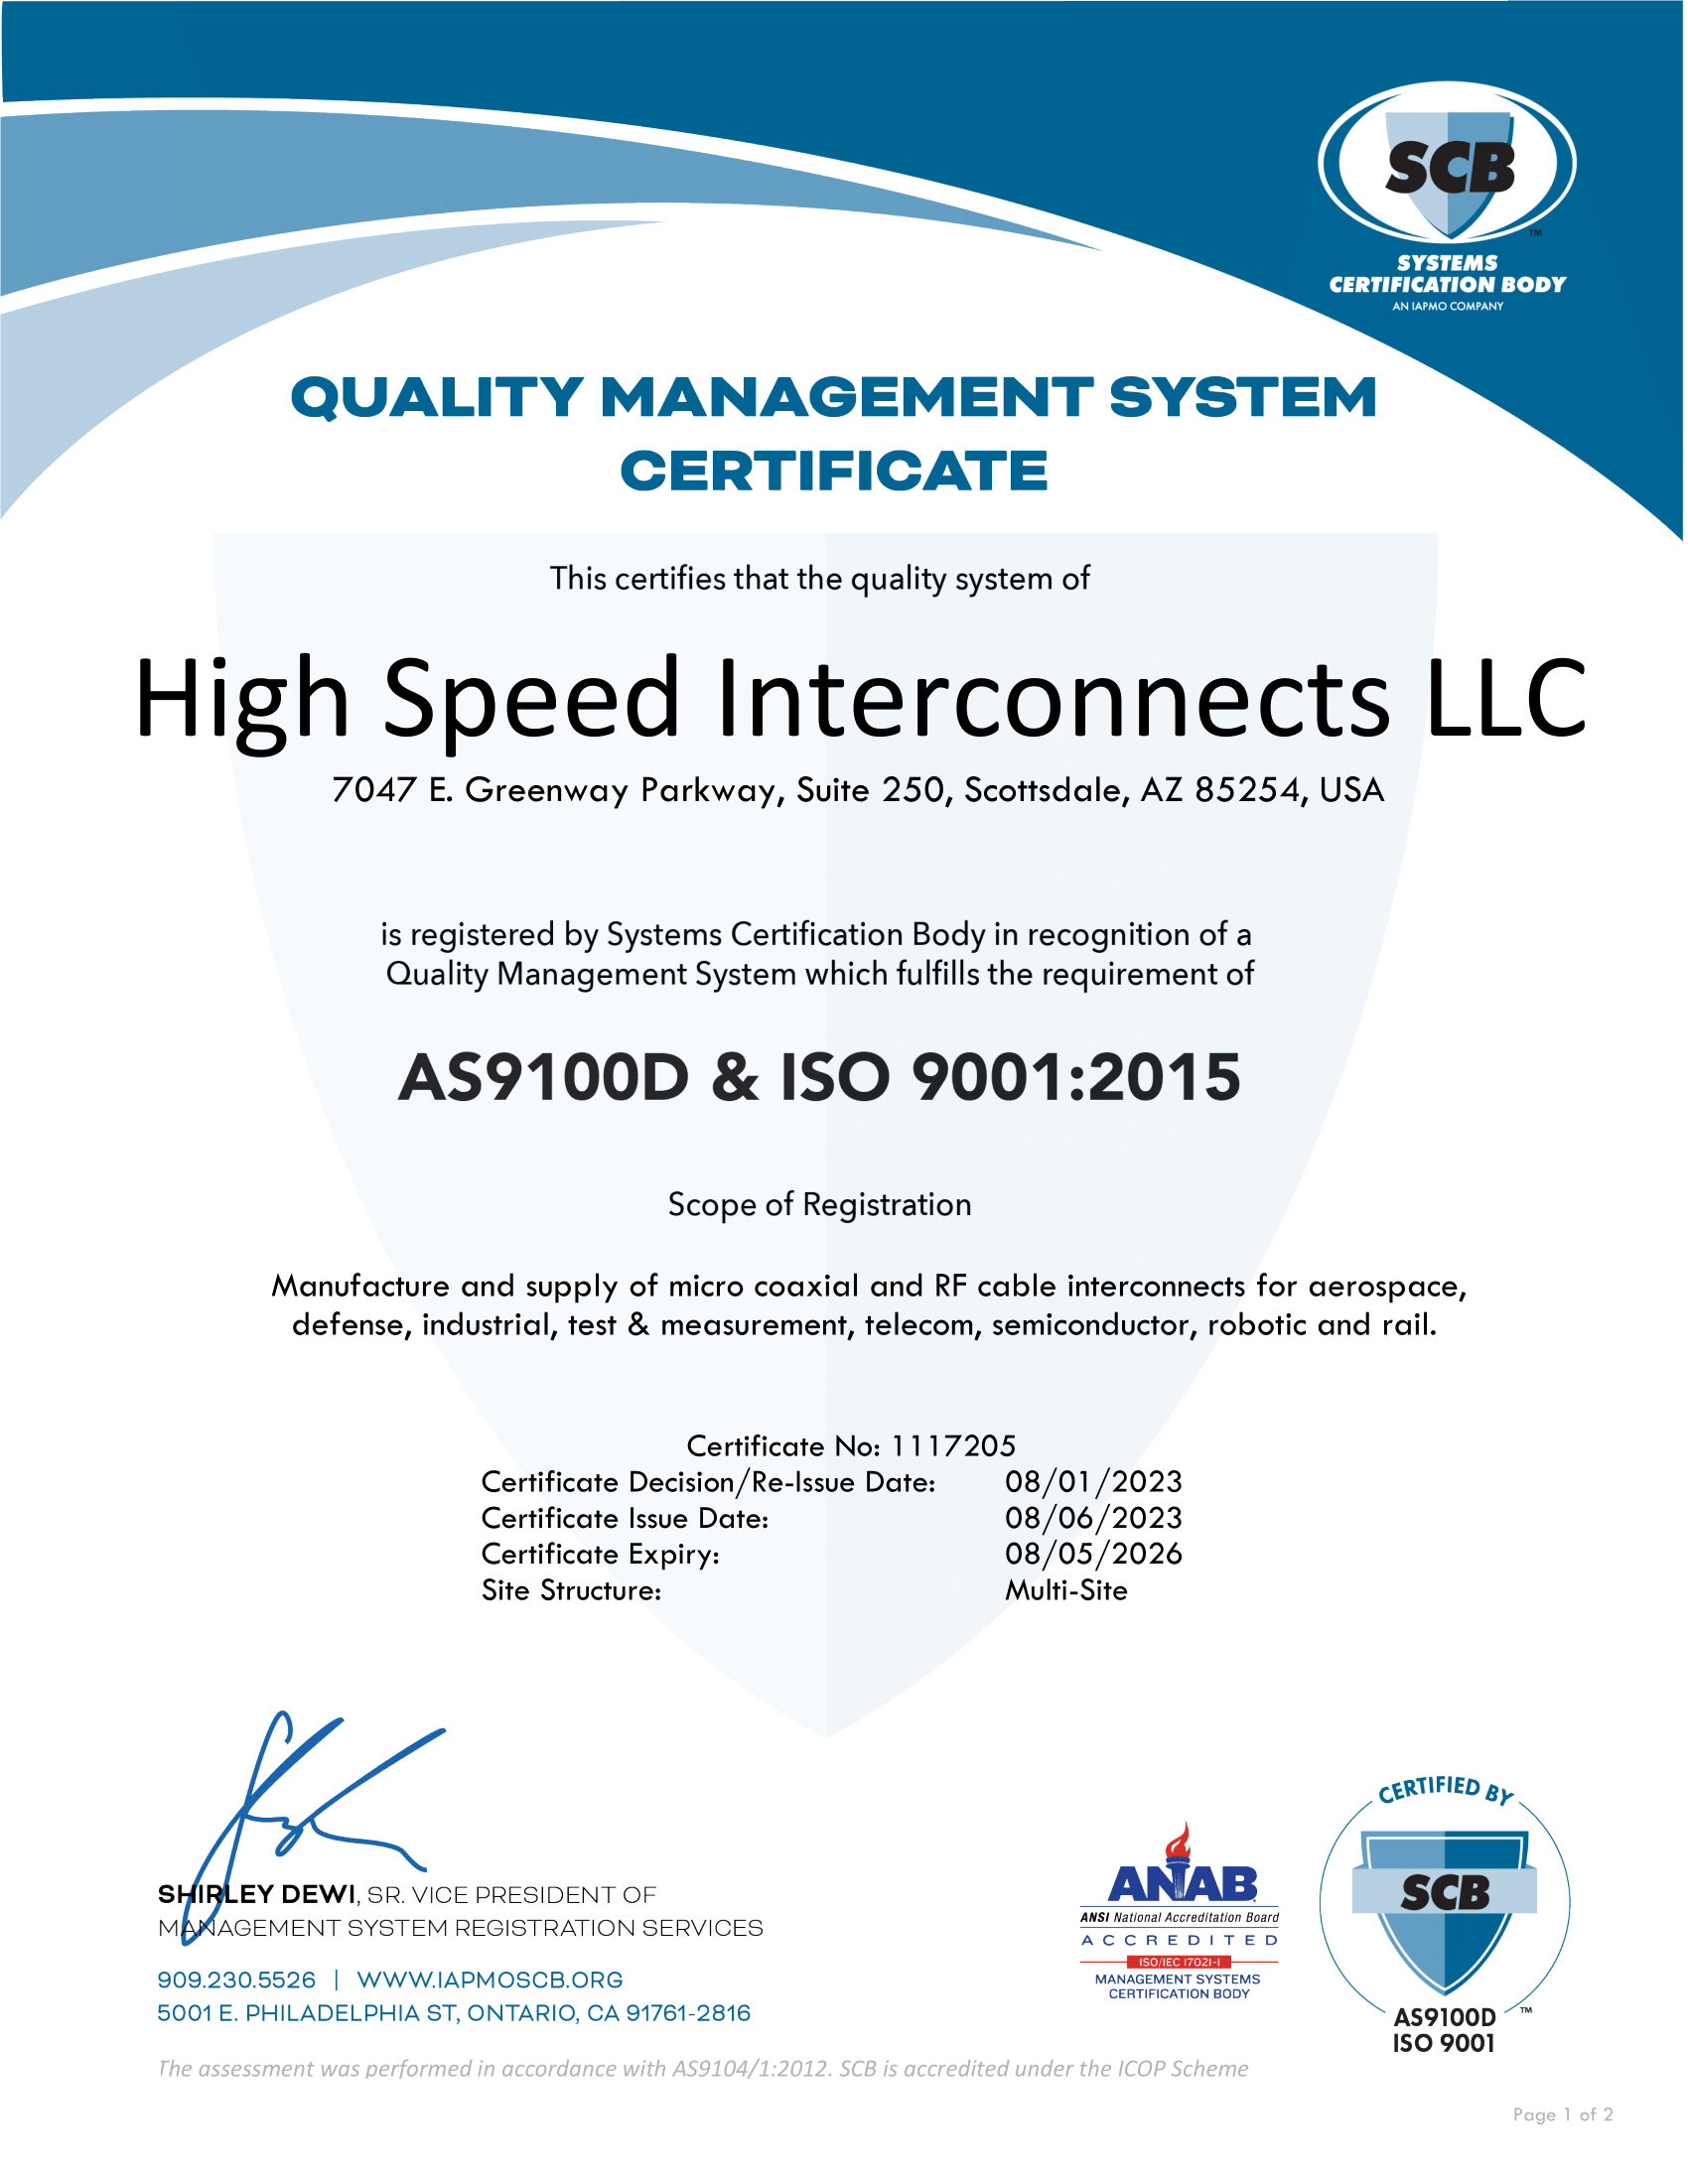 AS9100D & ISO 9001 Certificate - High Speed Interconnects - 2023-2026